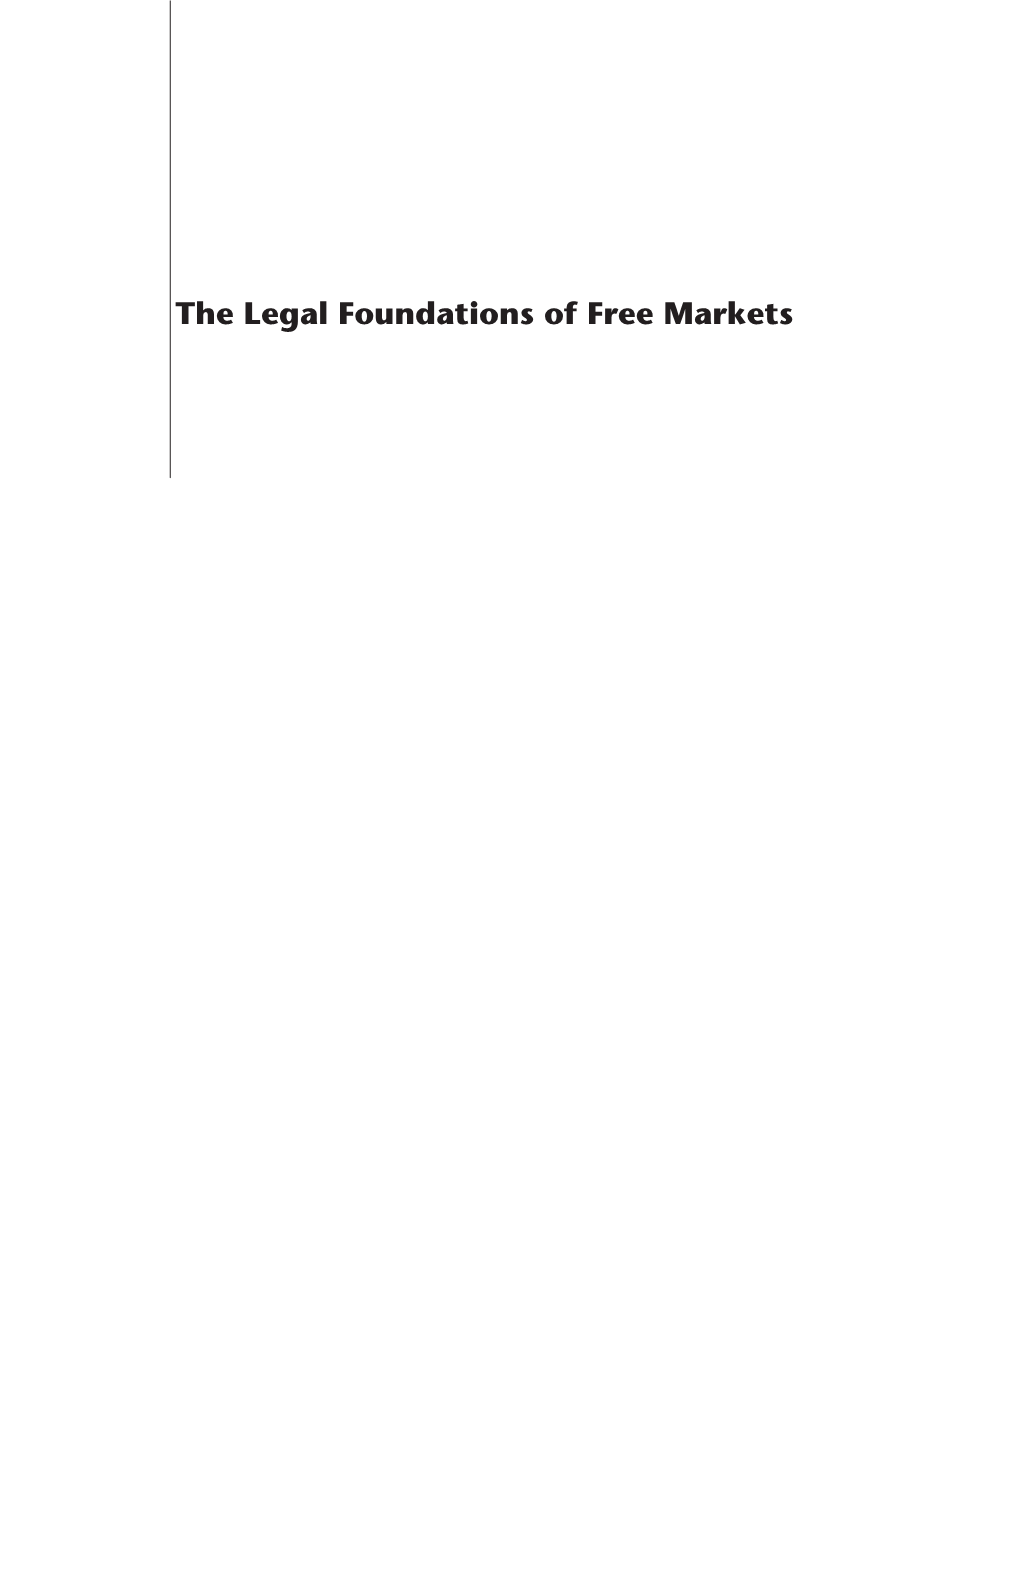 The Legal Foundations of Free Markets The Legal Foundations of Free Markets Edited by STEPHEN F